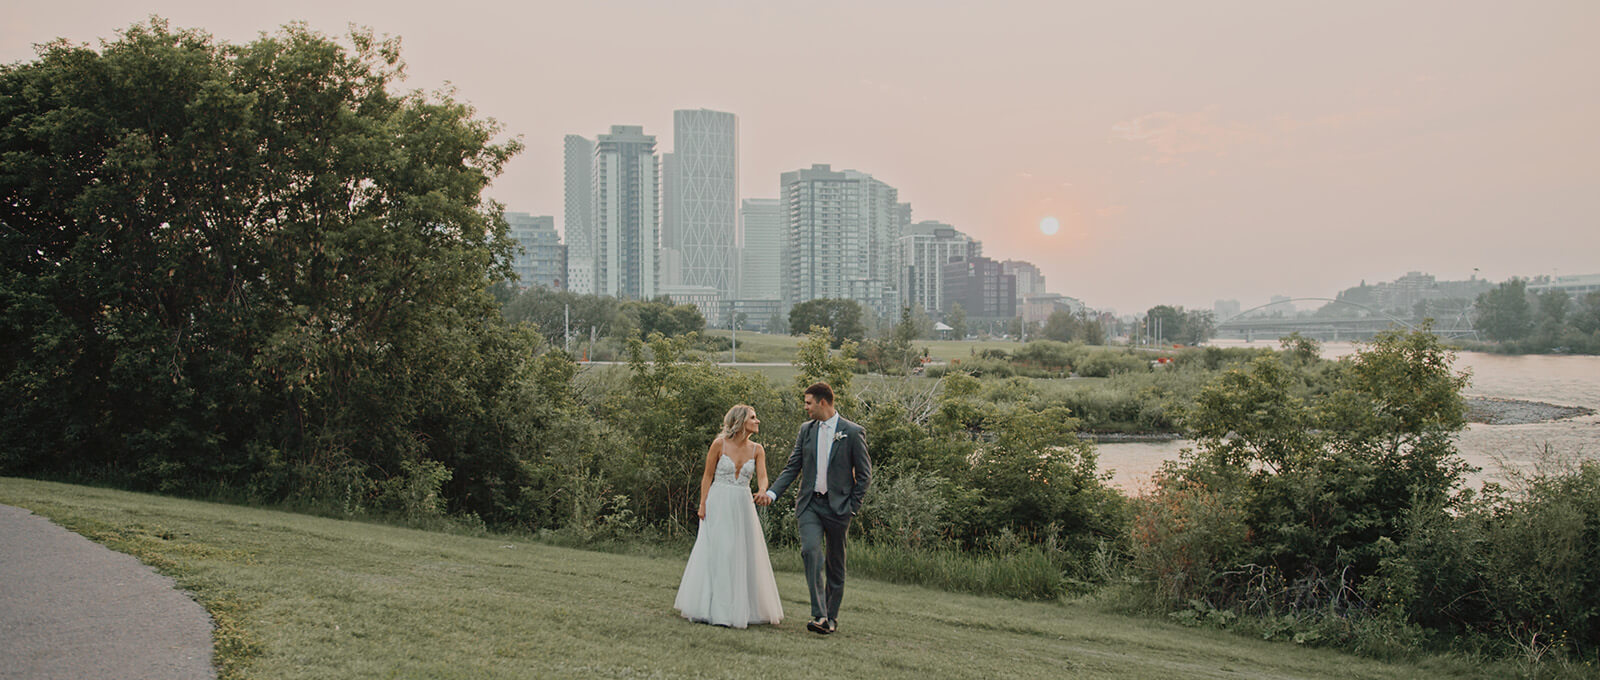 Samantha and Connor's wedding at the Deane House in Calgary